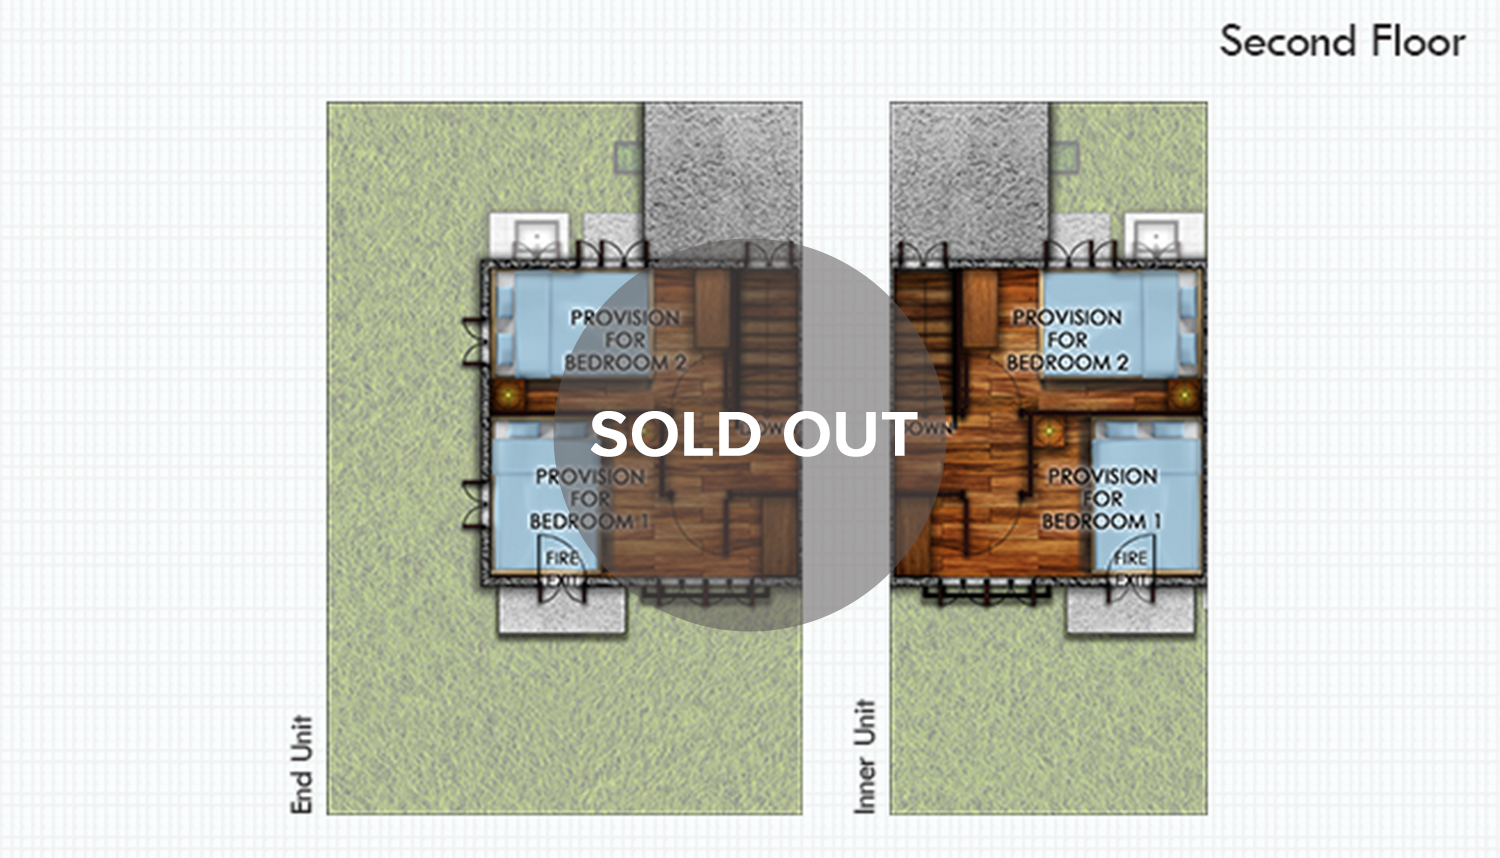 /assets/properties-house-model-gallery-and-landmarks-icons/lumina-home-models/home-model-gallery/angelique-townhouse/angelique-th-second-floor-plan-sold-out.png